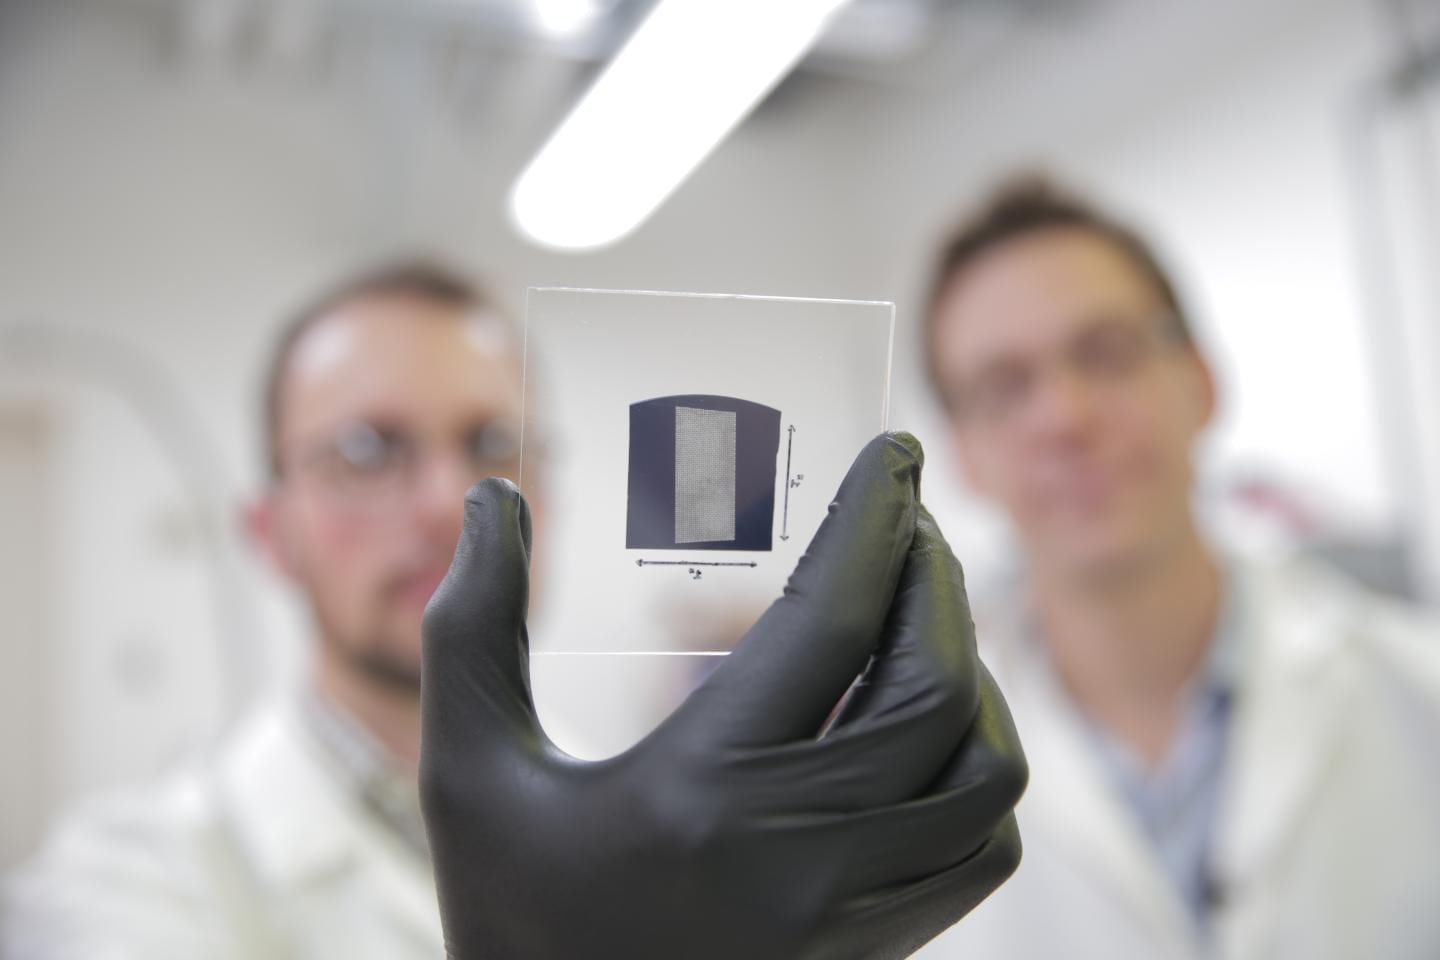 The UW-Madison engineers use a solution process to deposit aligned arrays of carbon nanotubes onto 1 inch by 1 inch substrates. The researchers used their scalable and rapid deposition process to coat the entire surface of this substrate with aligned carbon nanotubes in less than 5 minutes. The team's breakthrough could pave the way for carbon nanotube transistors to replace silicon transistors, and is particularly promising for wireless communications technologies. CREDIT Stephanie Precourt